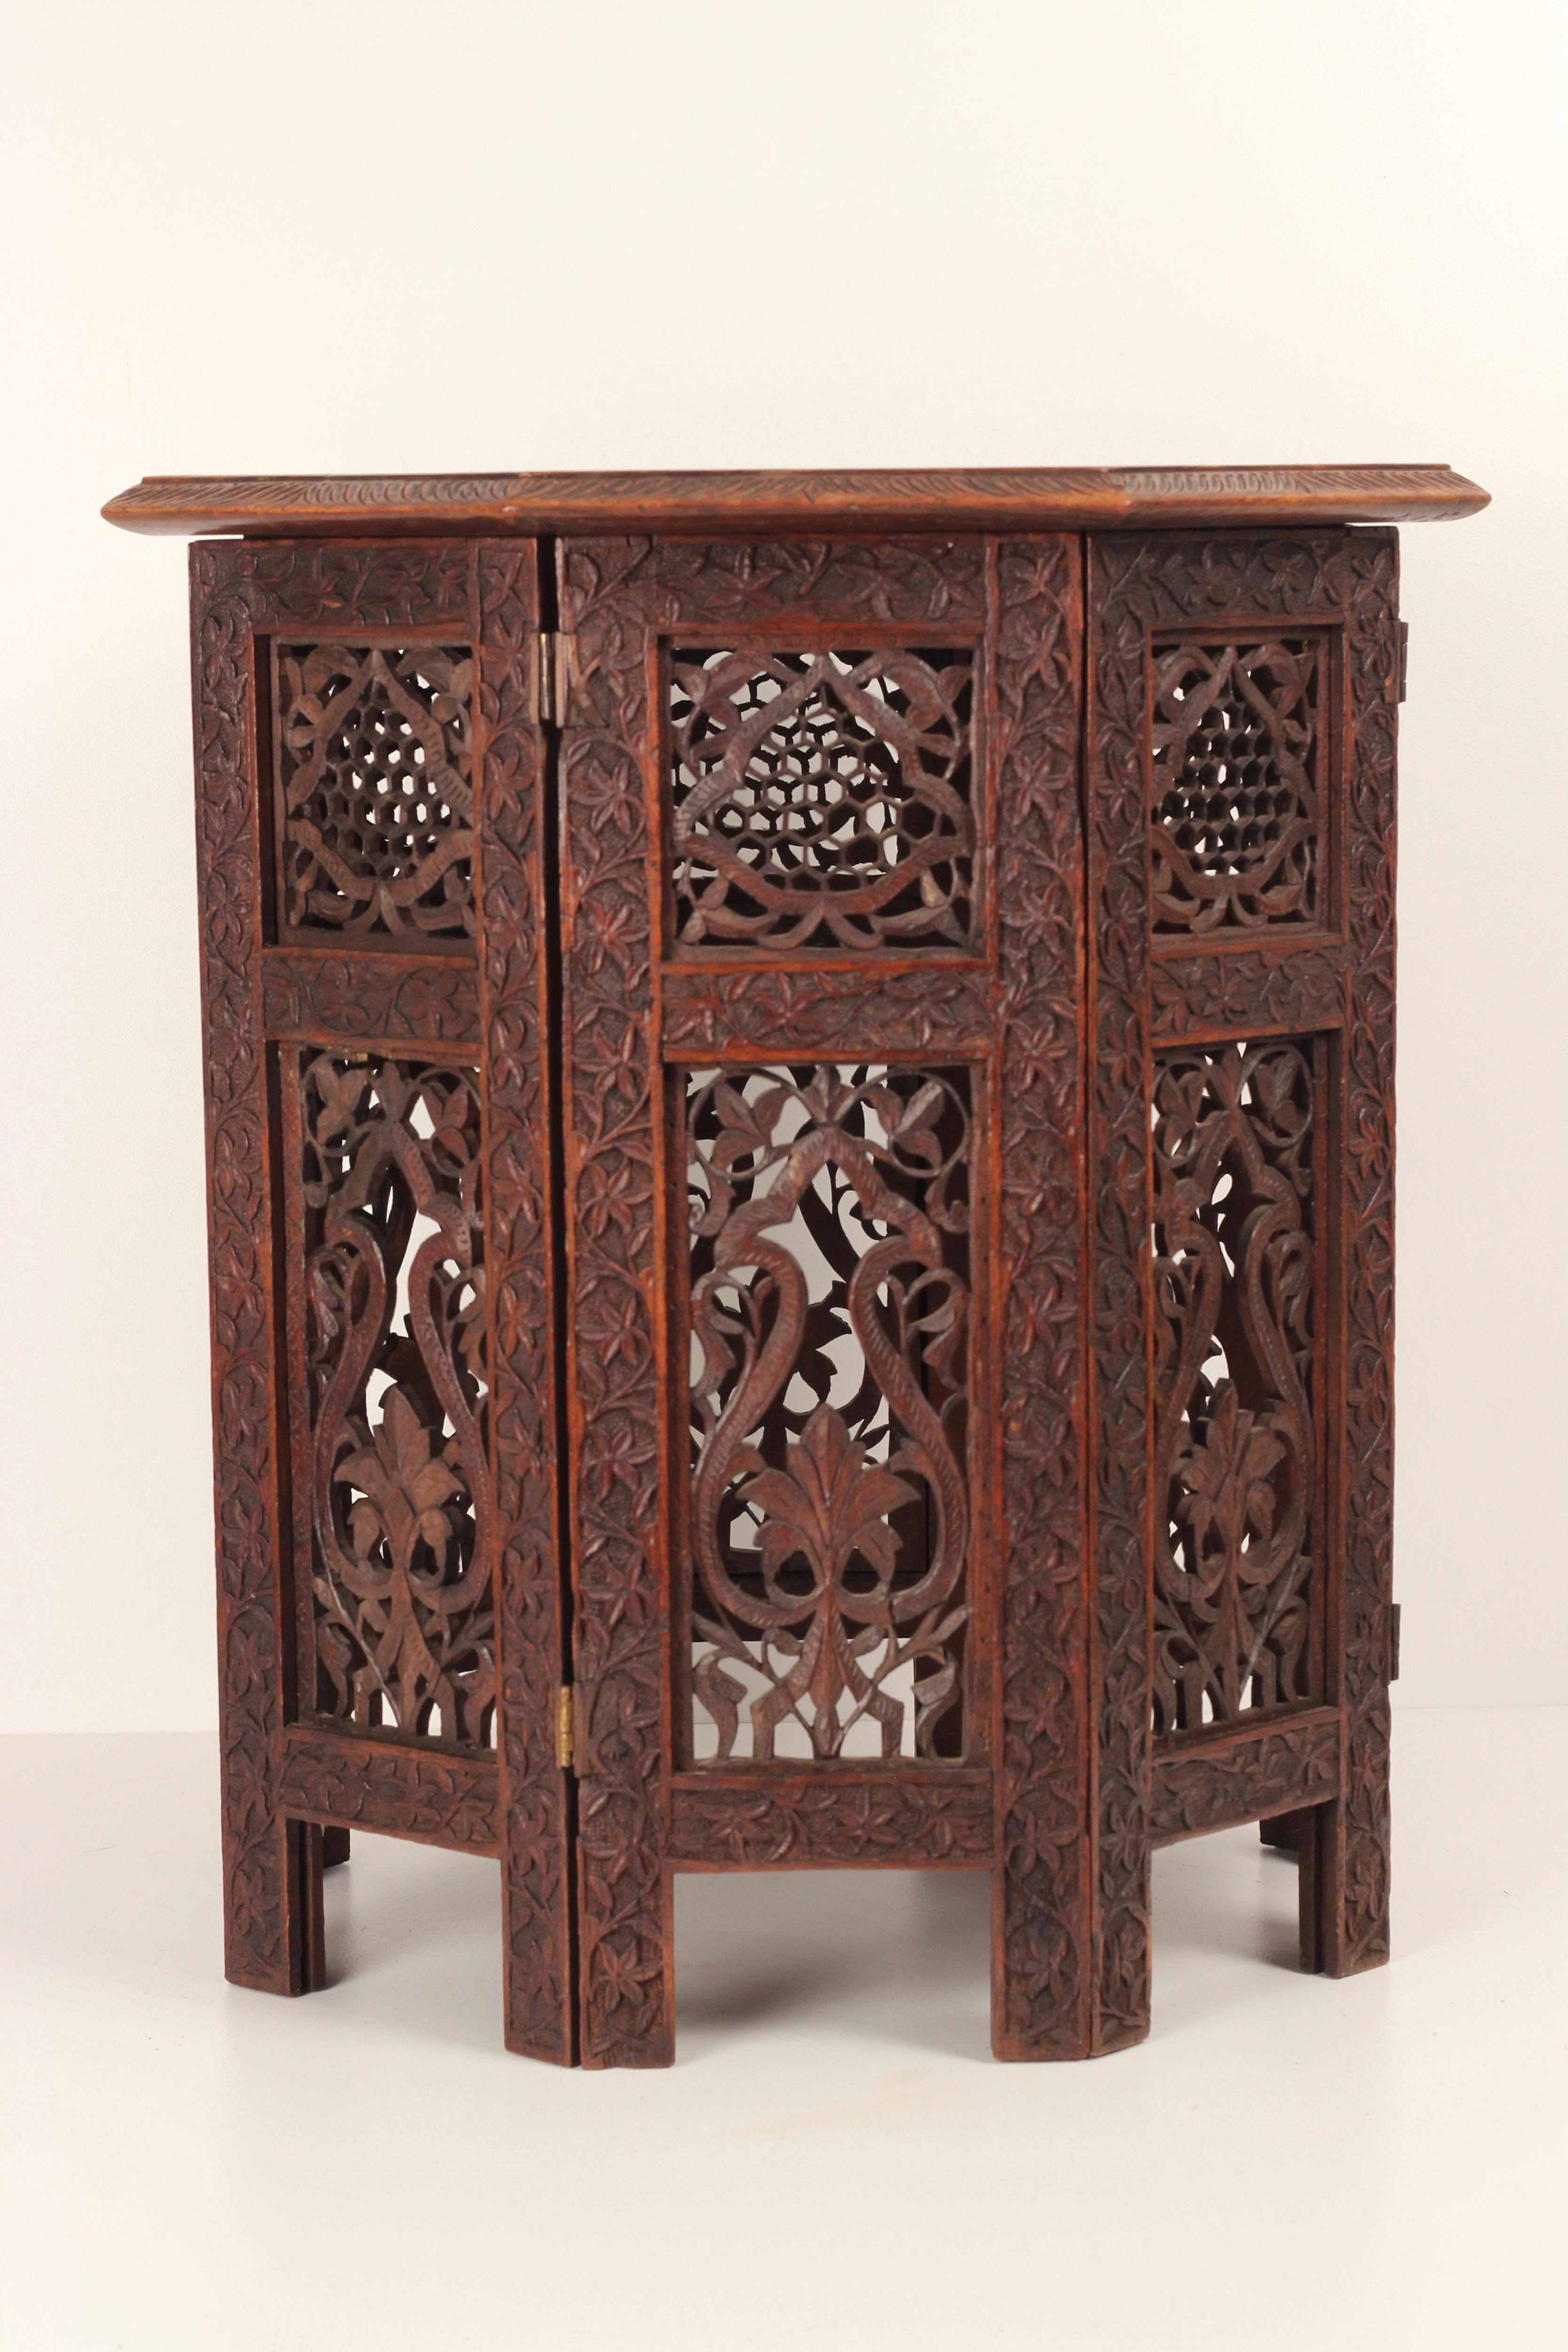 Boho Chic style 19th Century Hand Carved Wooden Moorish Octagonal Table For Sale 2